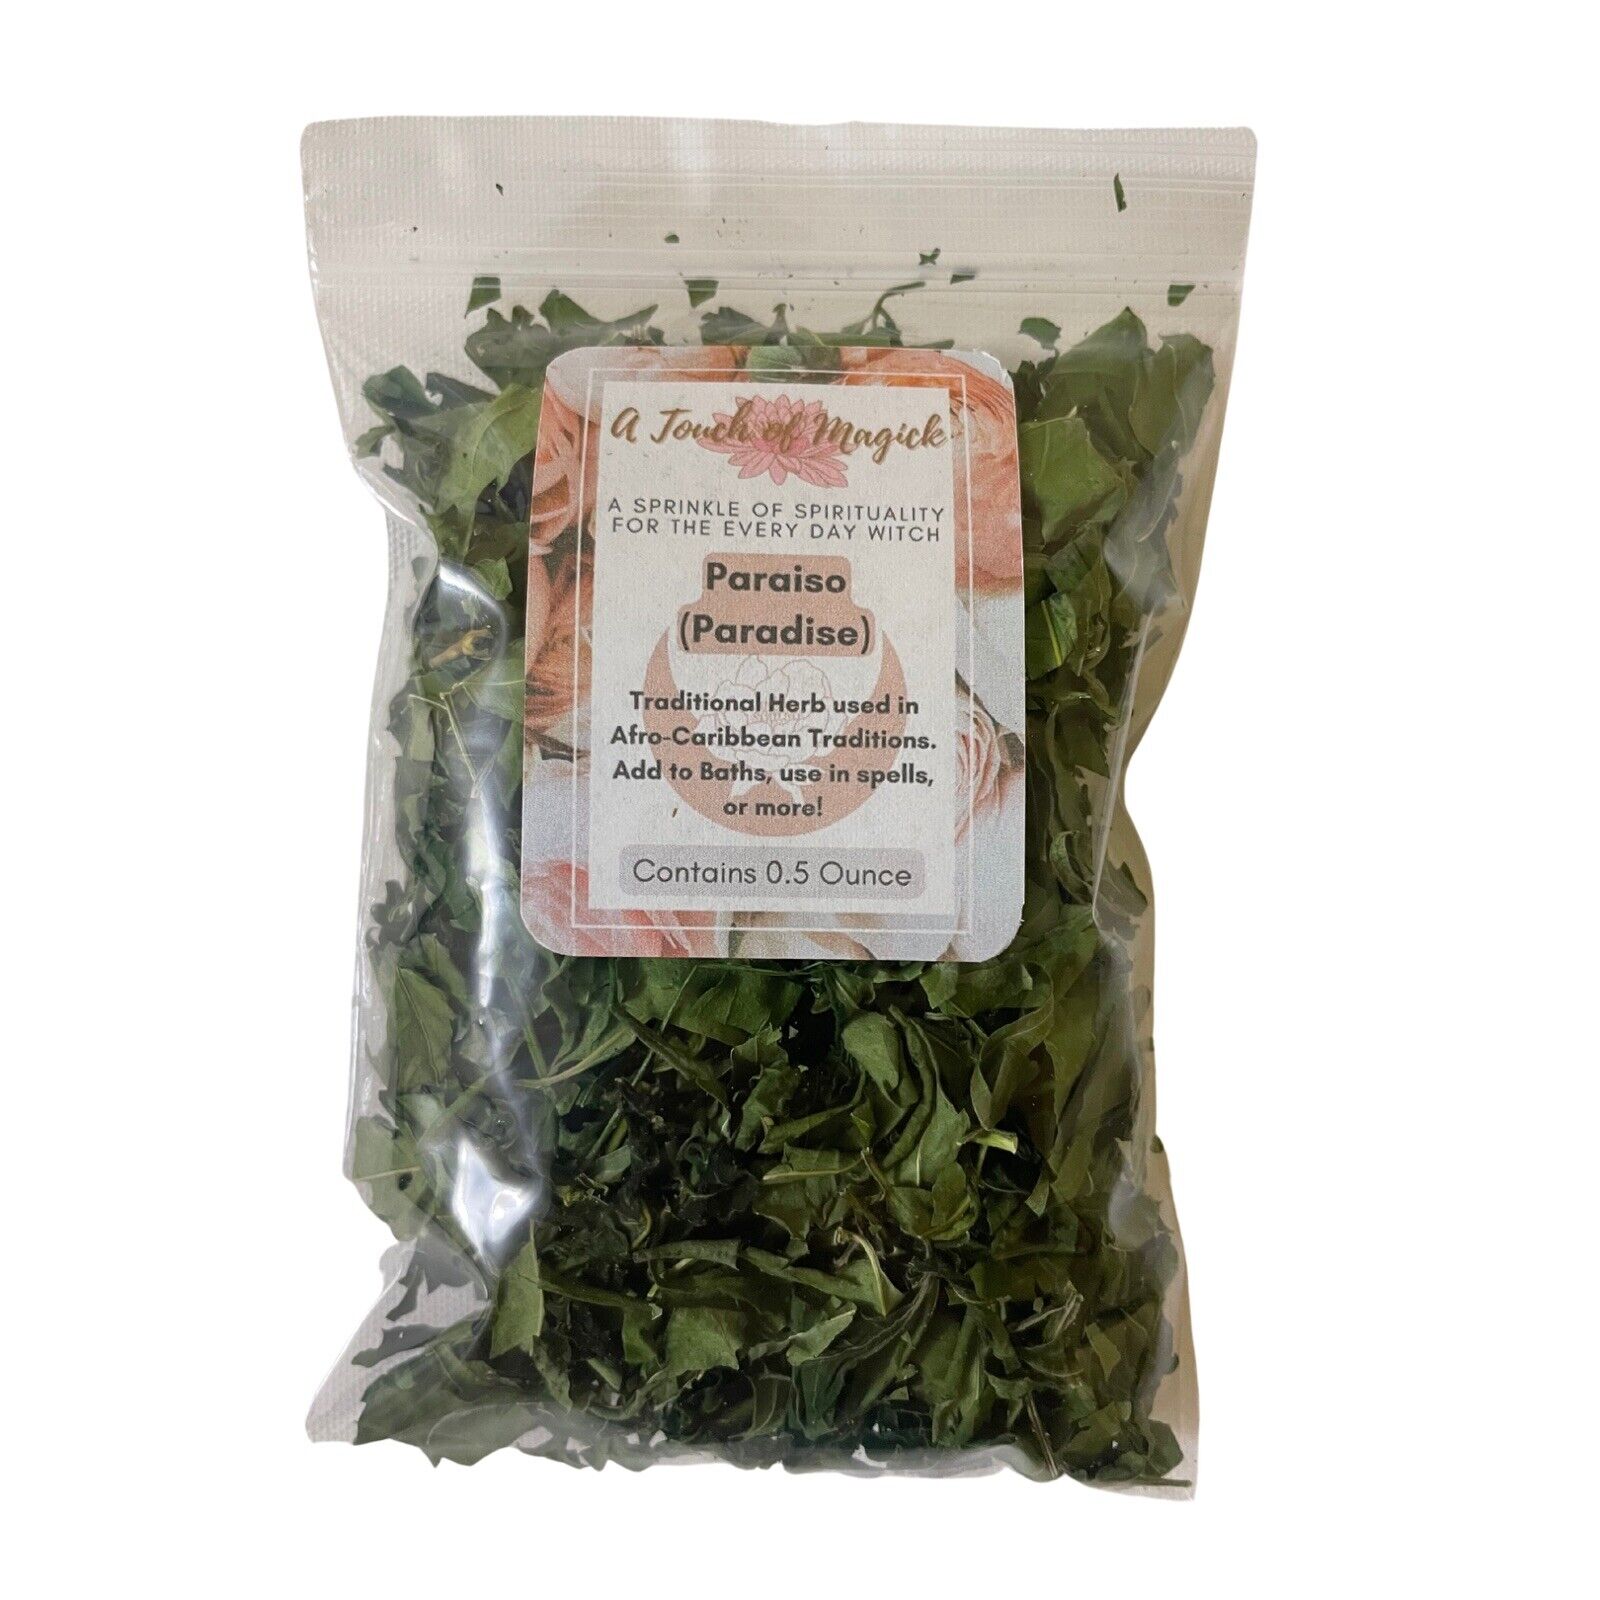 Paraiso Dried Herb for Love, Prosperity and Spiritual Cleansing use